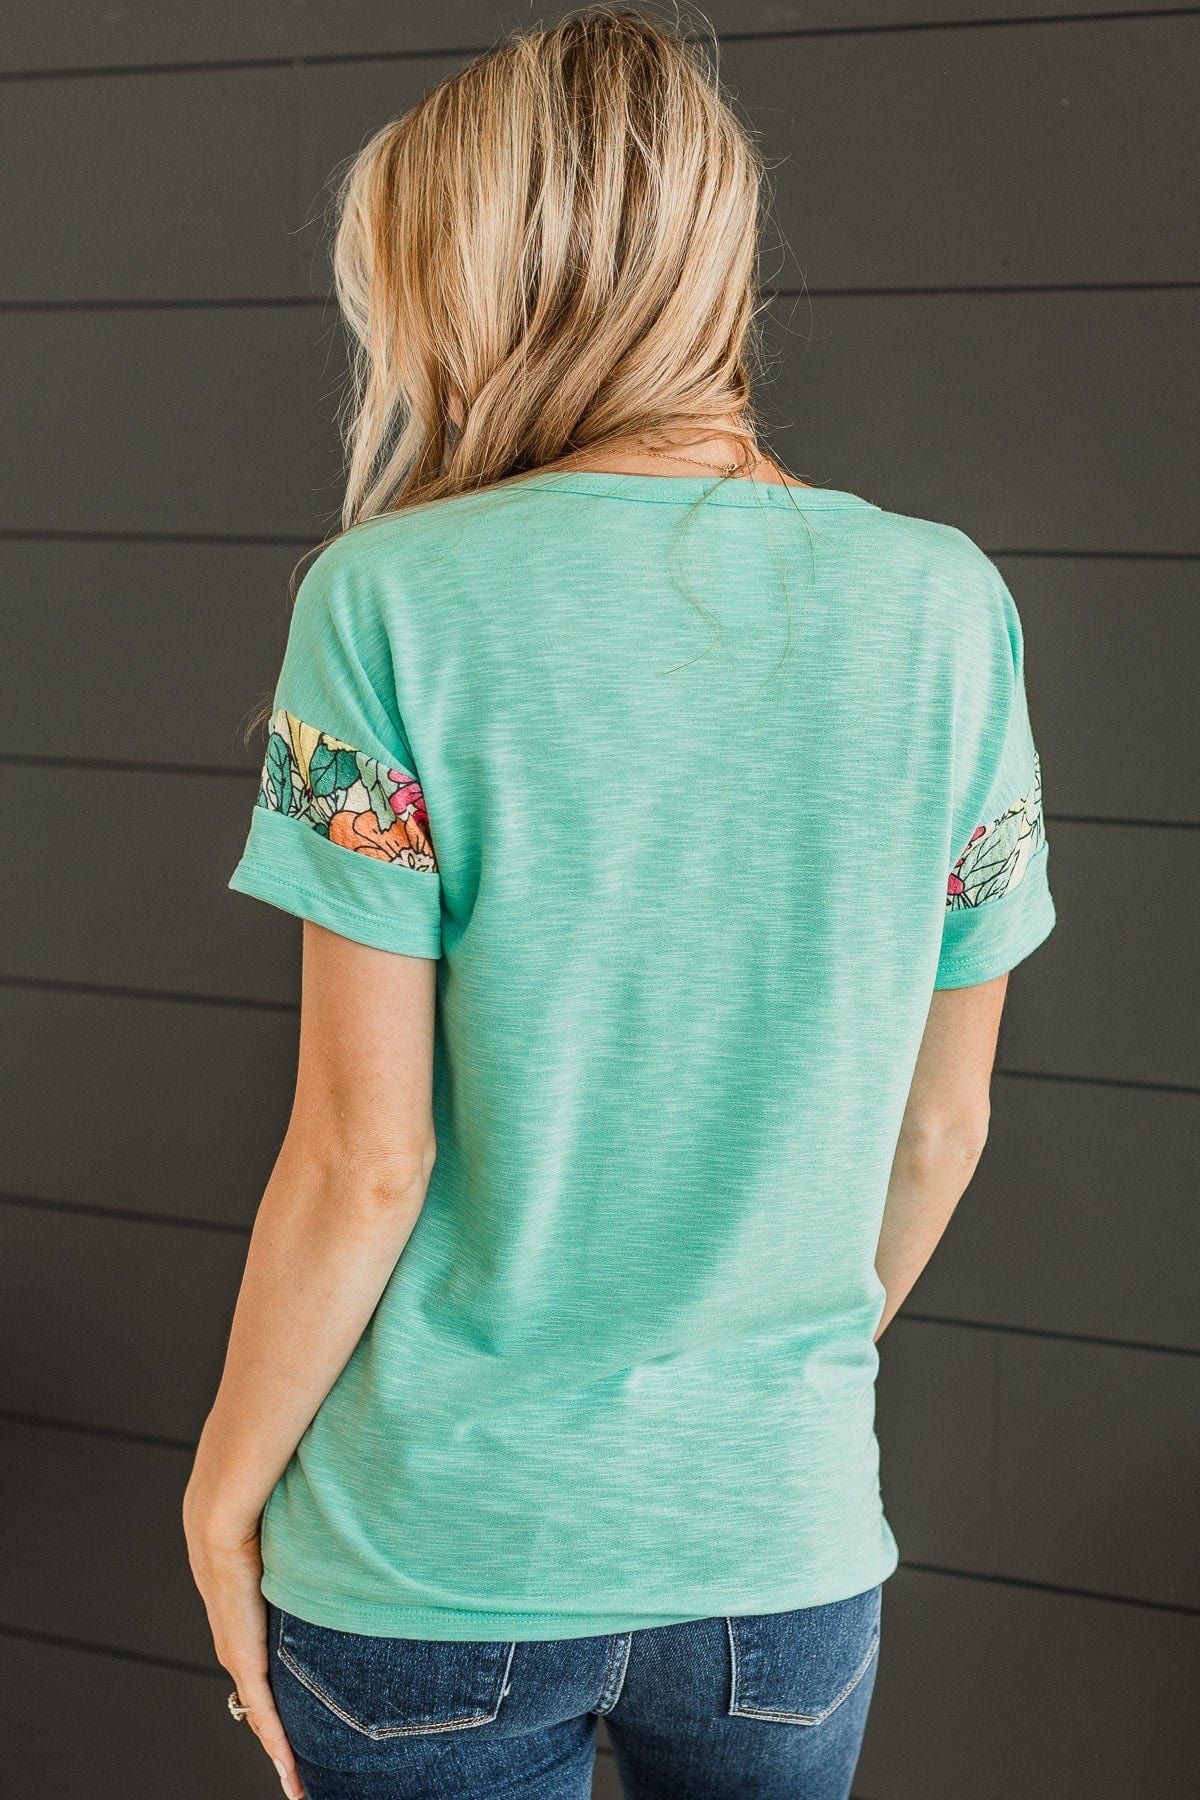 Bound For Beauty Knit Top- Mint Blue